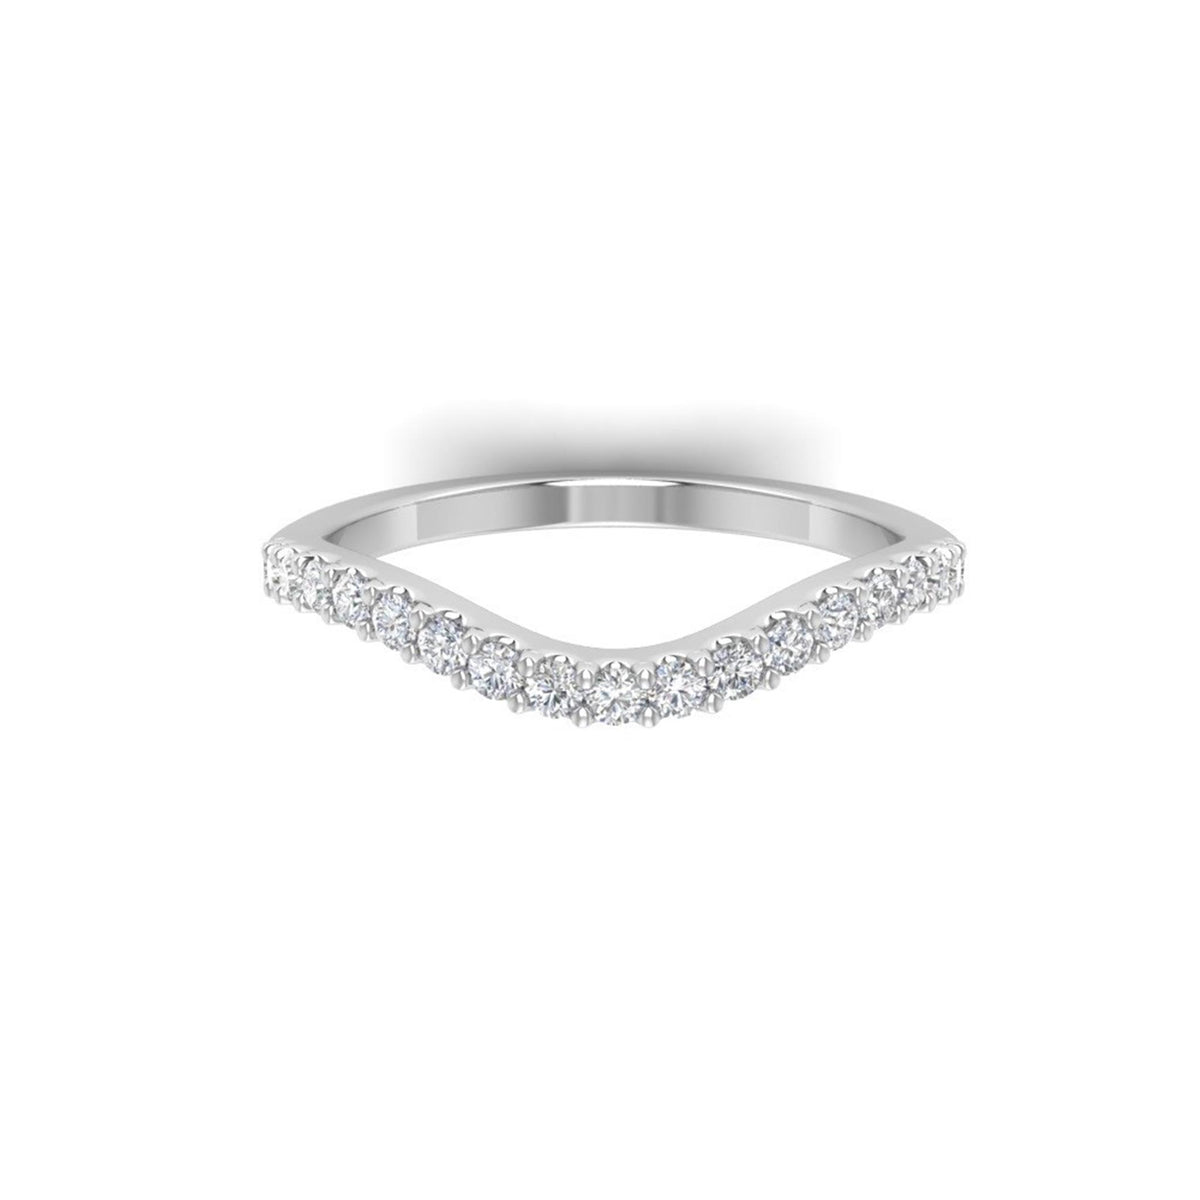 14Kt White Gold Curved Wedding Ring With 0.25cttw Natural Diamonds